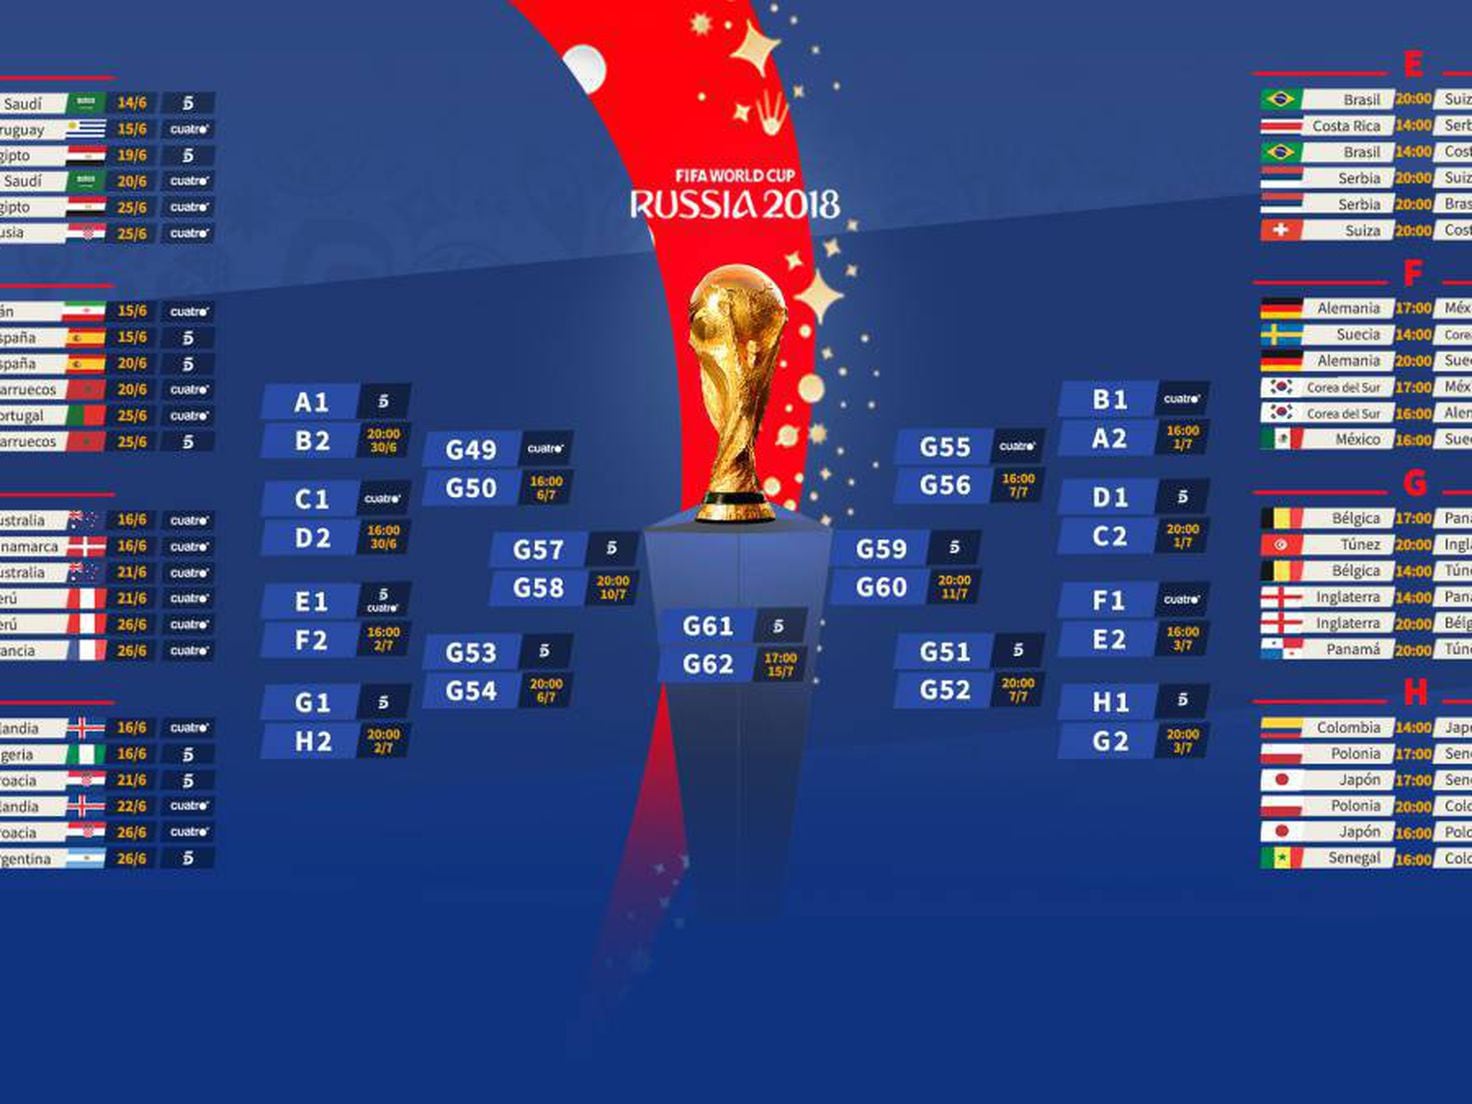 Did you know all 6 World Cup tie-breakers? 😅 The group stage for the